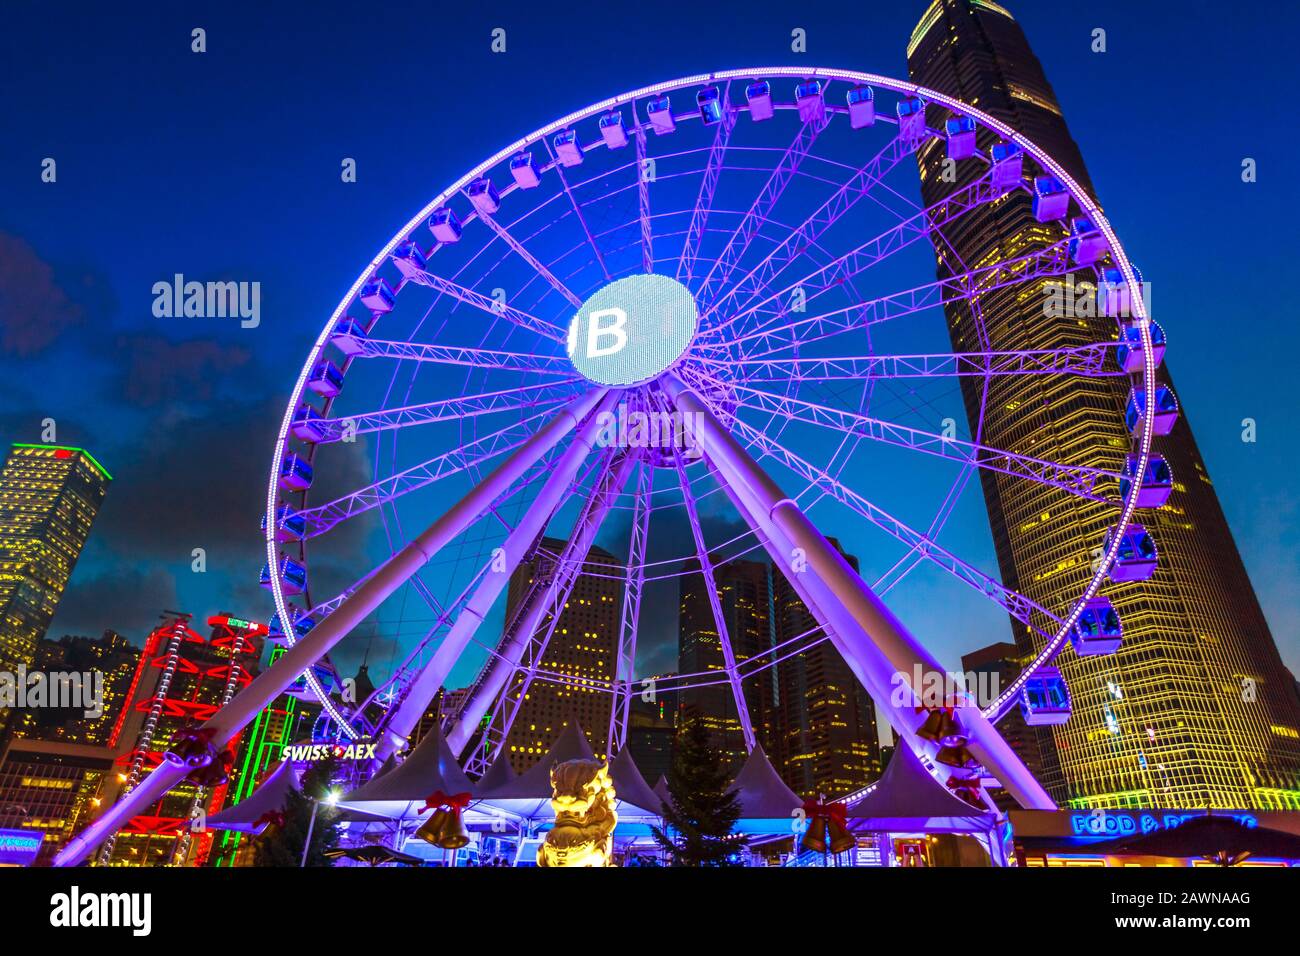 Hong Kong, China - December 11, 2016: the Observation Wheel of Hong Kong island at night near Ferry Pier area with landmark buildings and banks HQs in Stock Photo